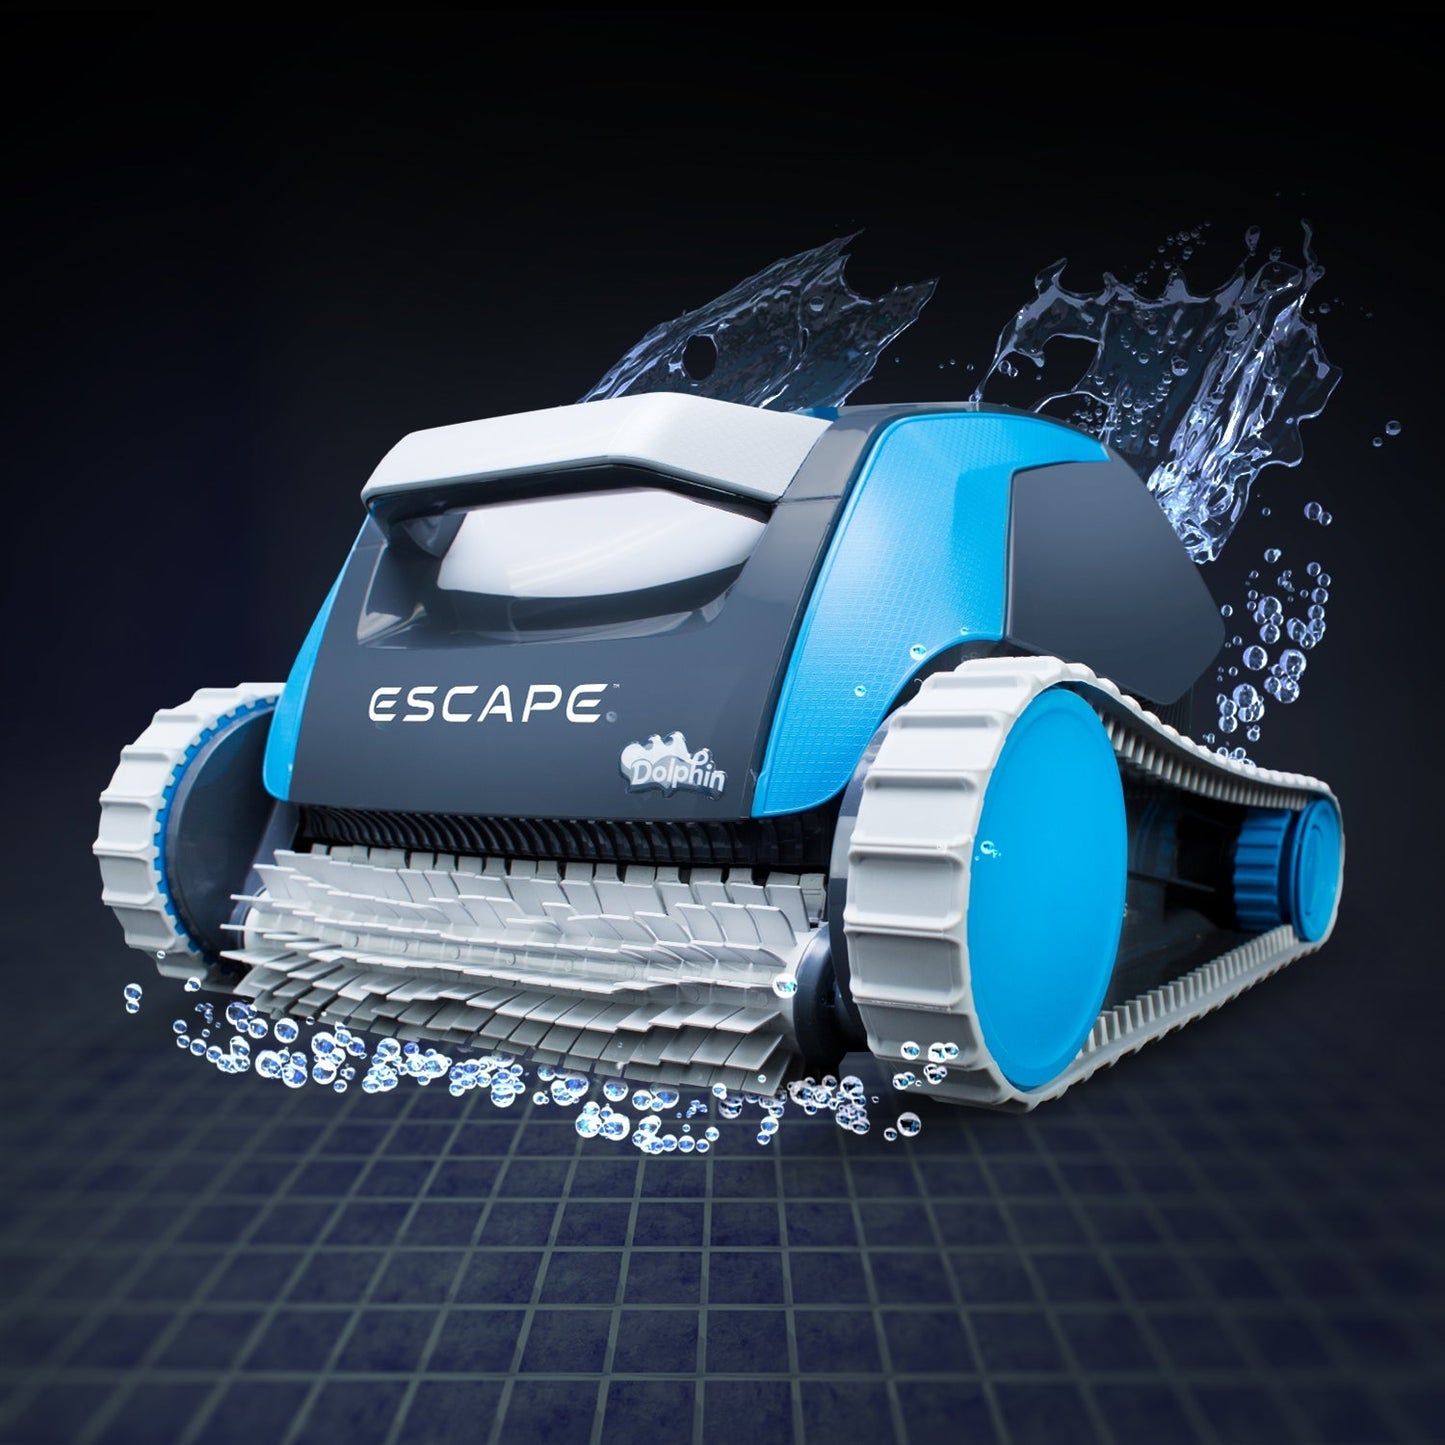 Bundle - Dolphin Escape with Universal Caddy